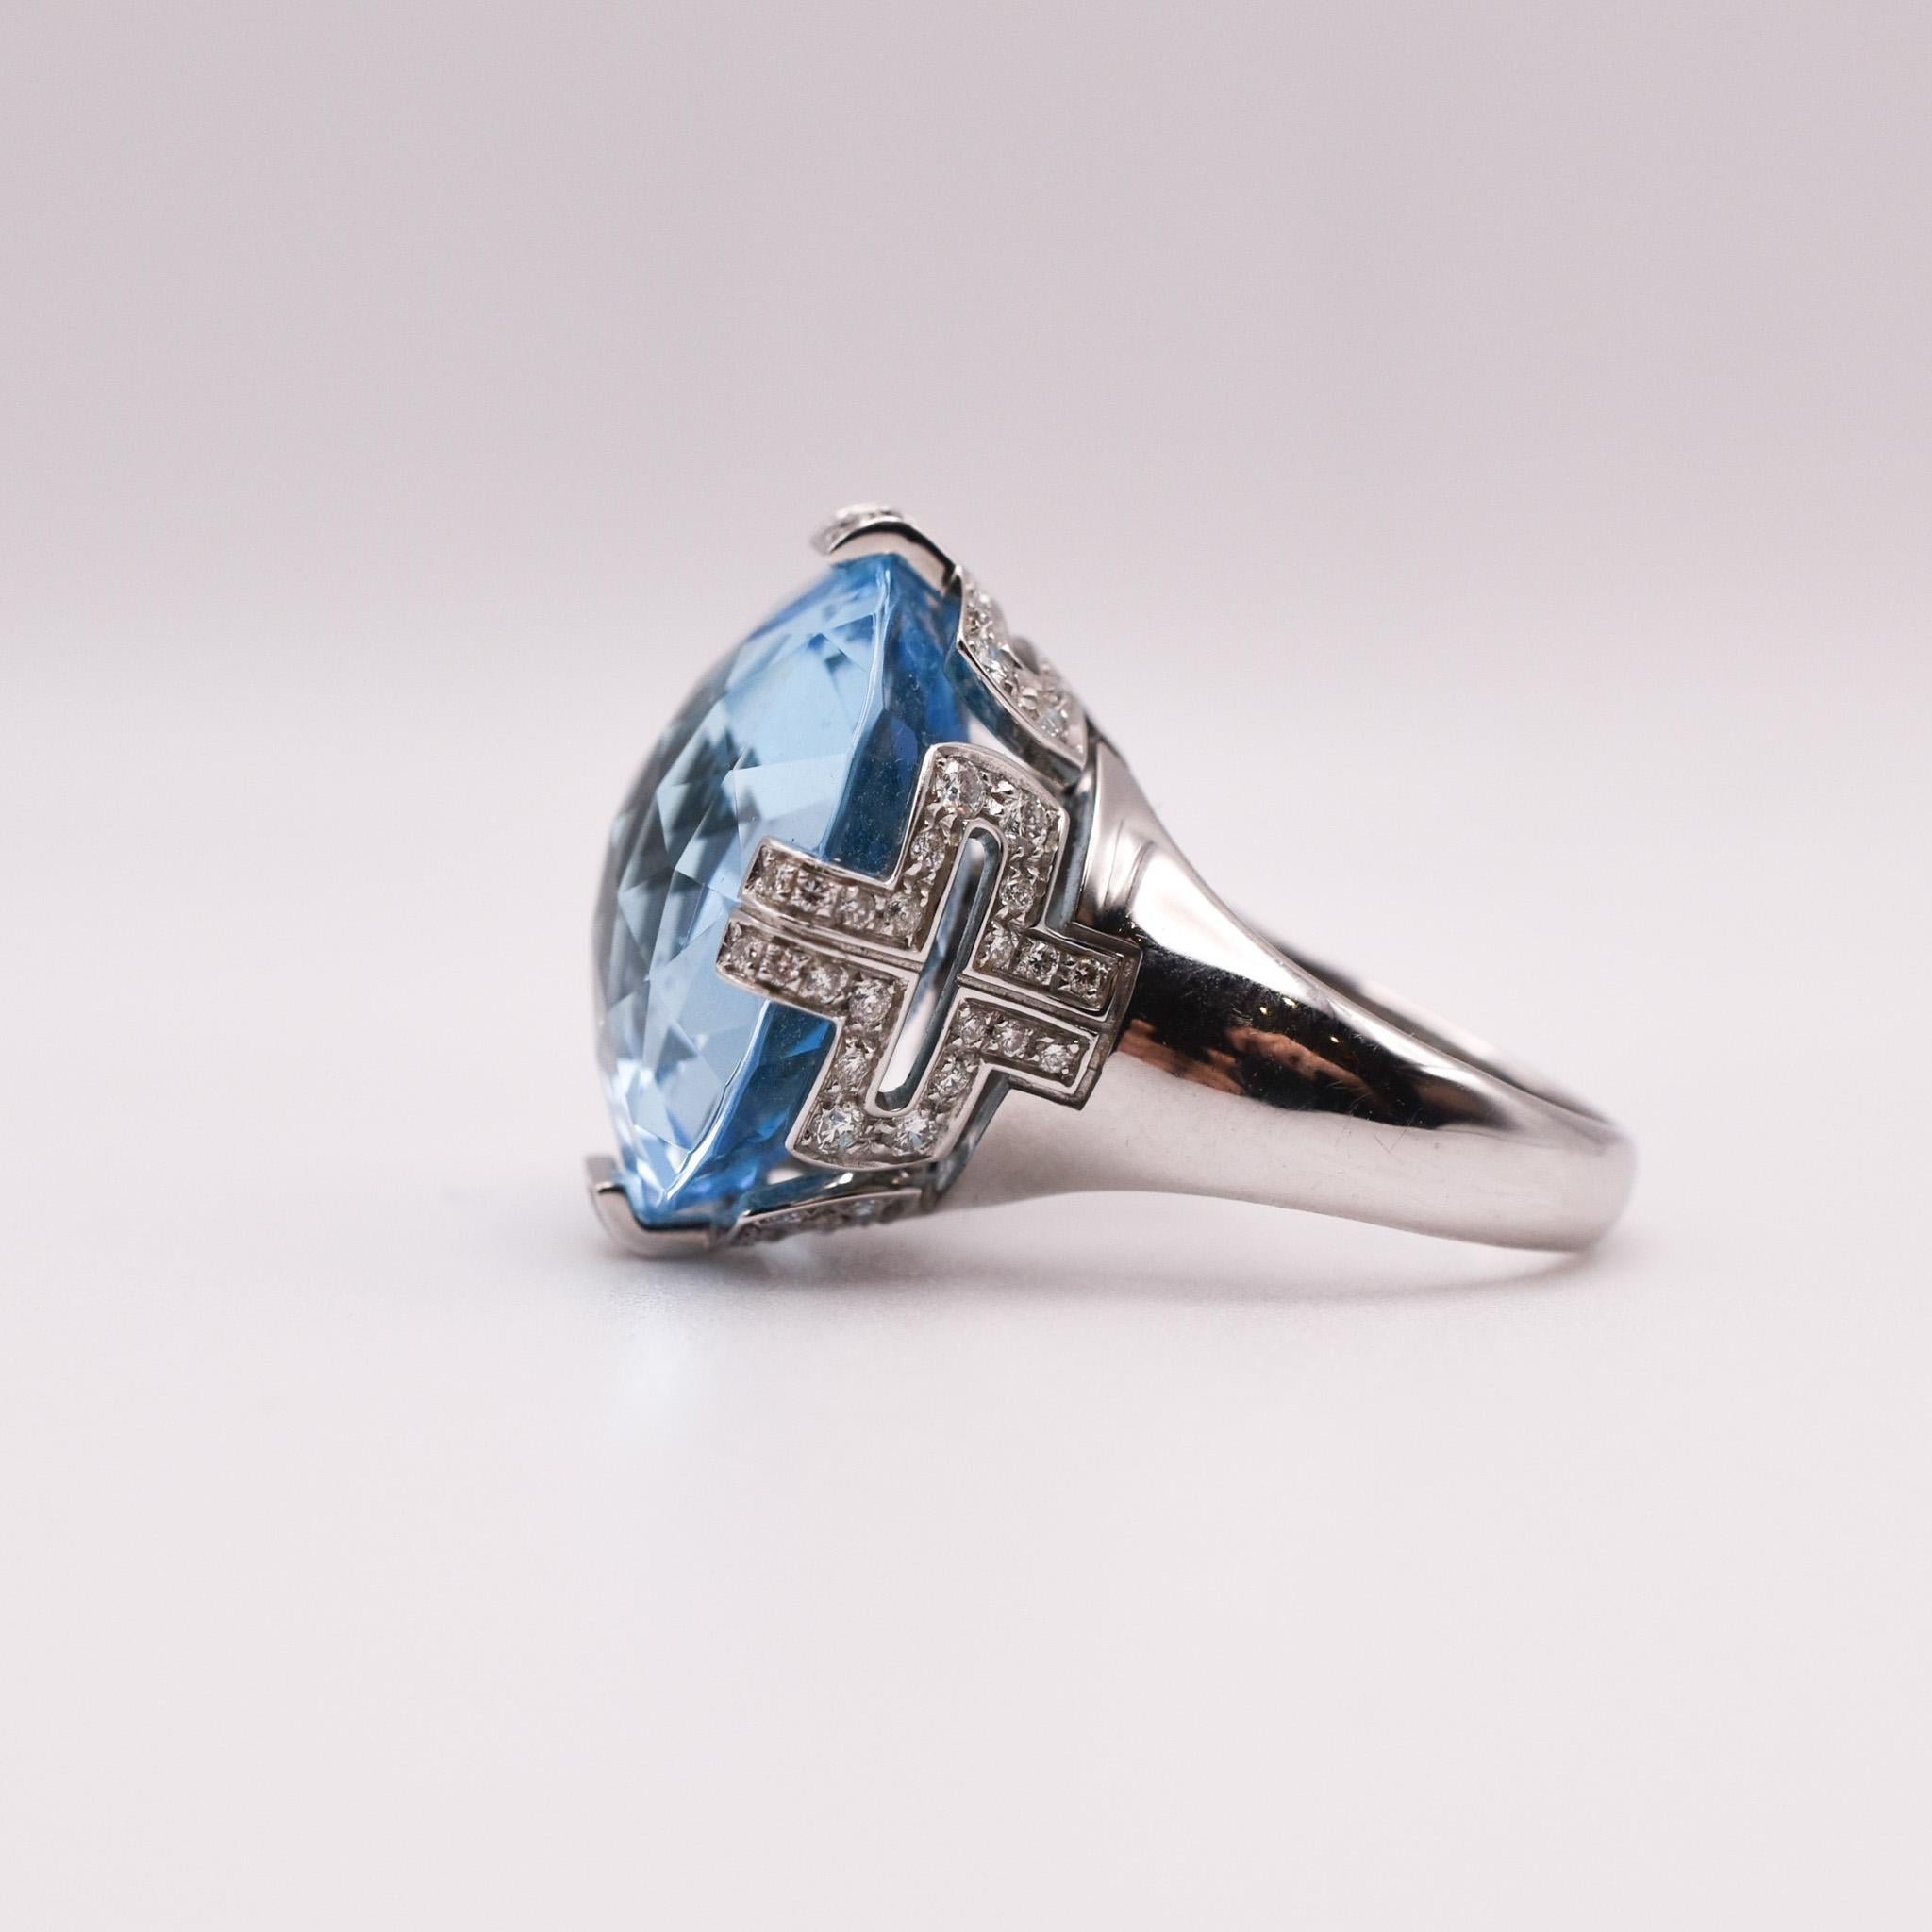 Bulgari 'Parenthesis' 18k Gold Blue Topaz & Diamond Cocktail Ring In Excellent Condition For Sale In New York, NY